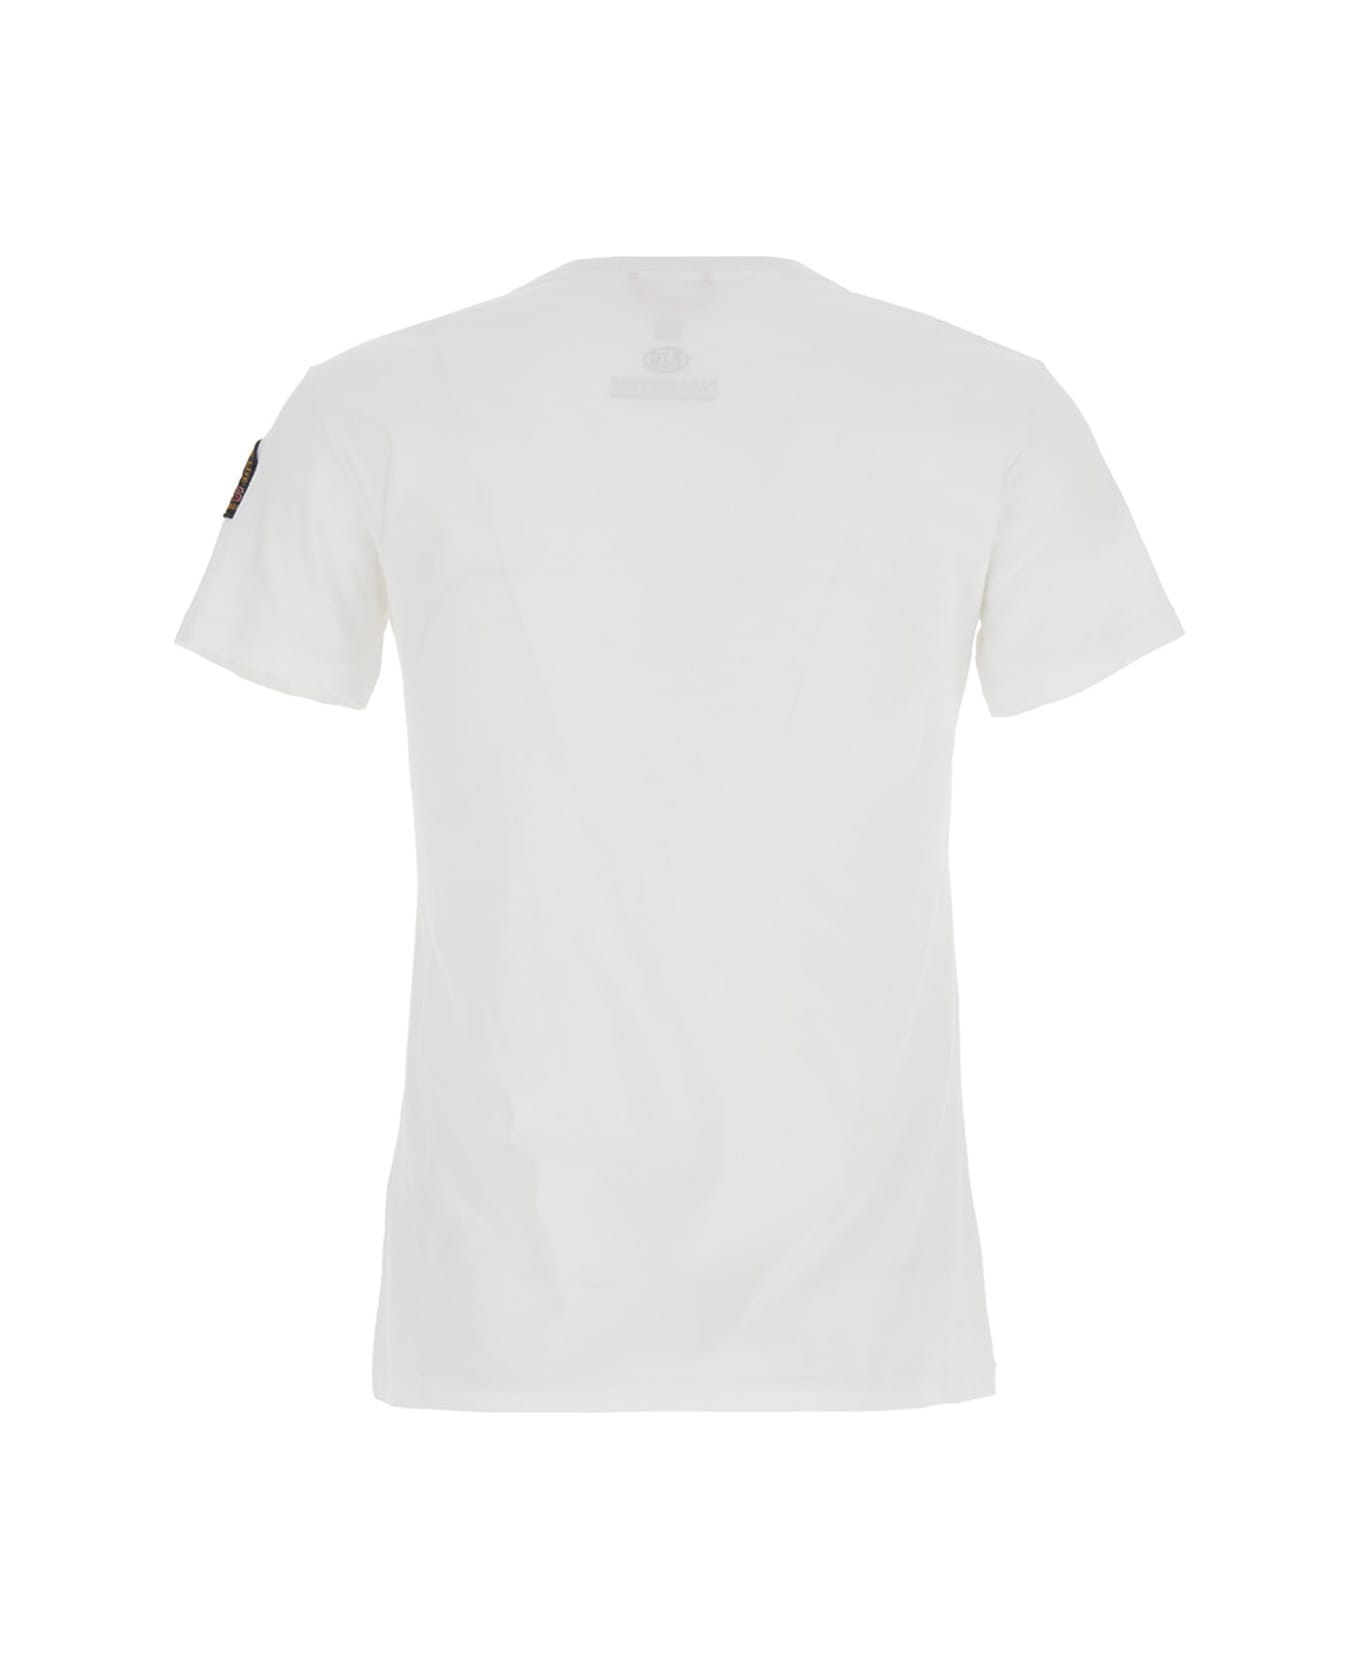 Parajumpers T-shirt 'basic' - White